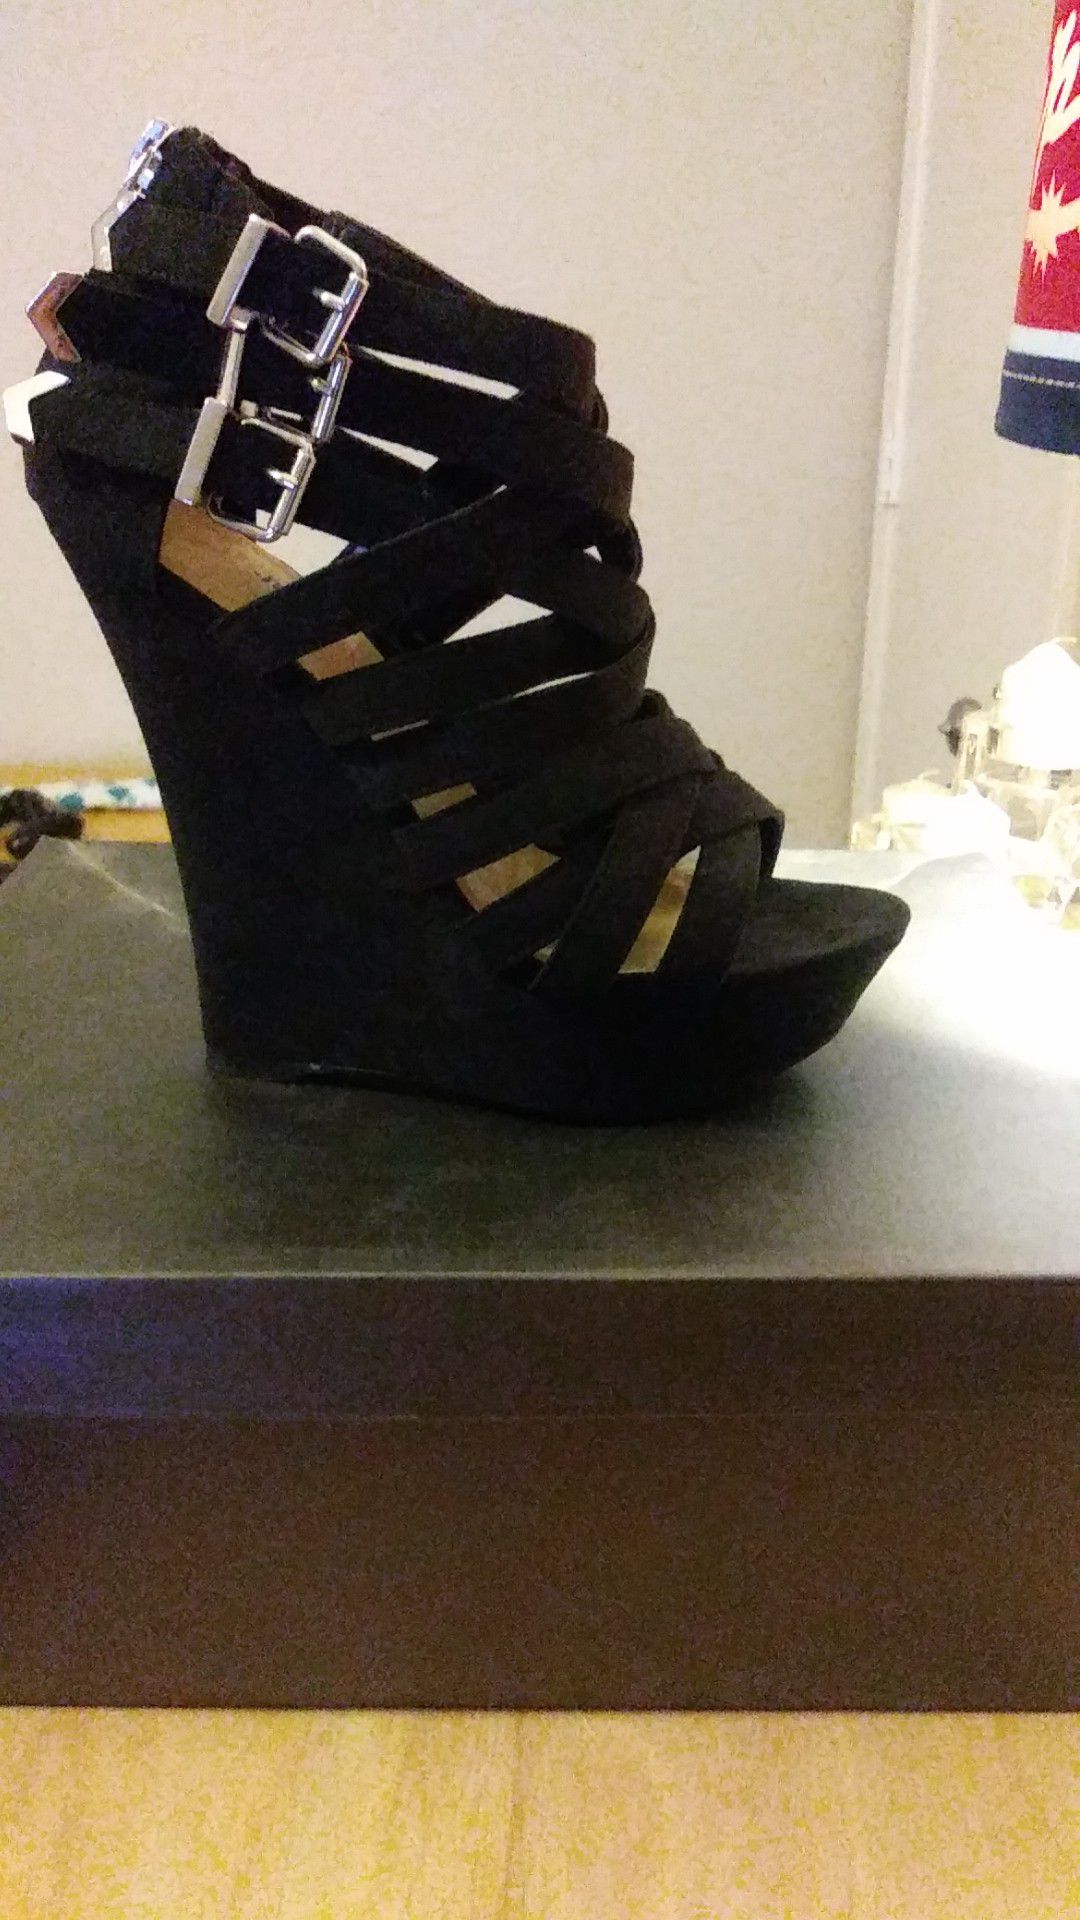 New suede strappy wedges